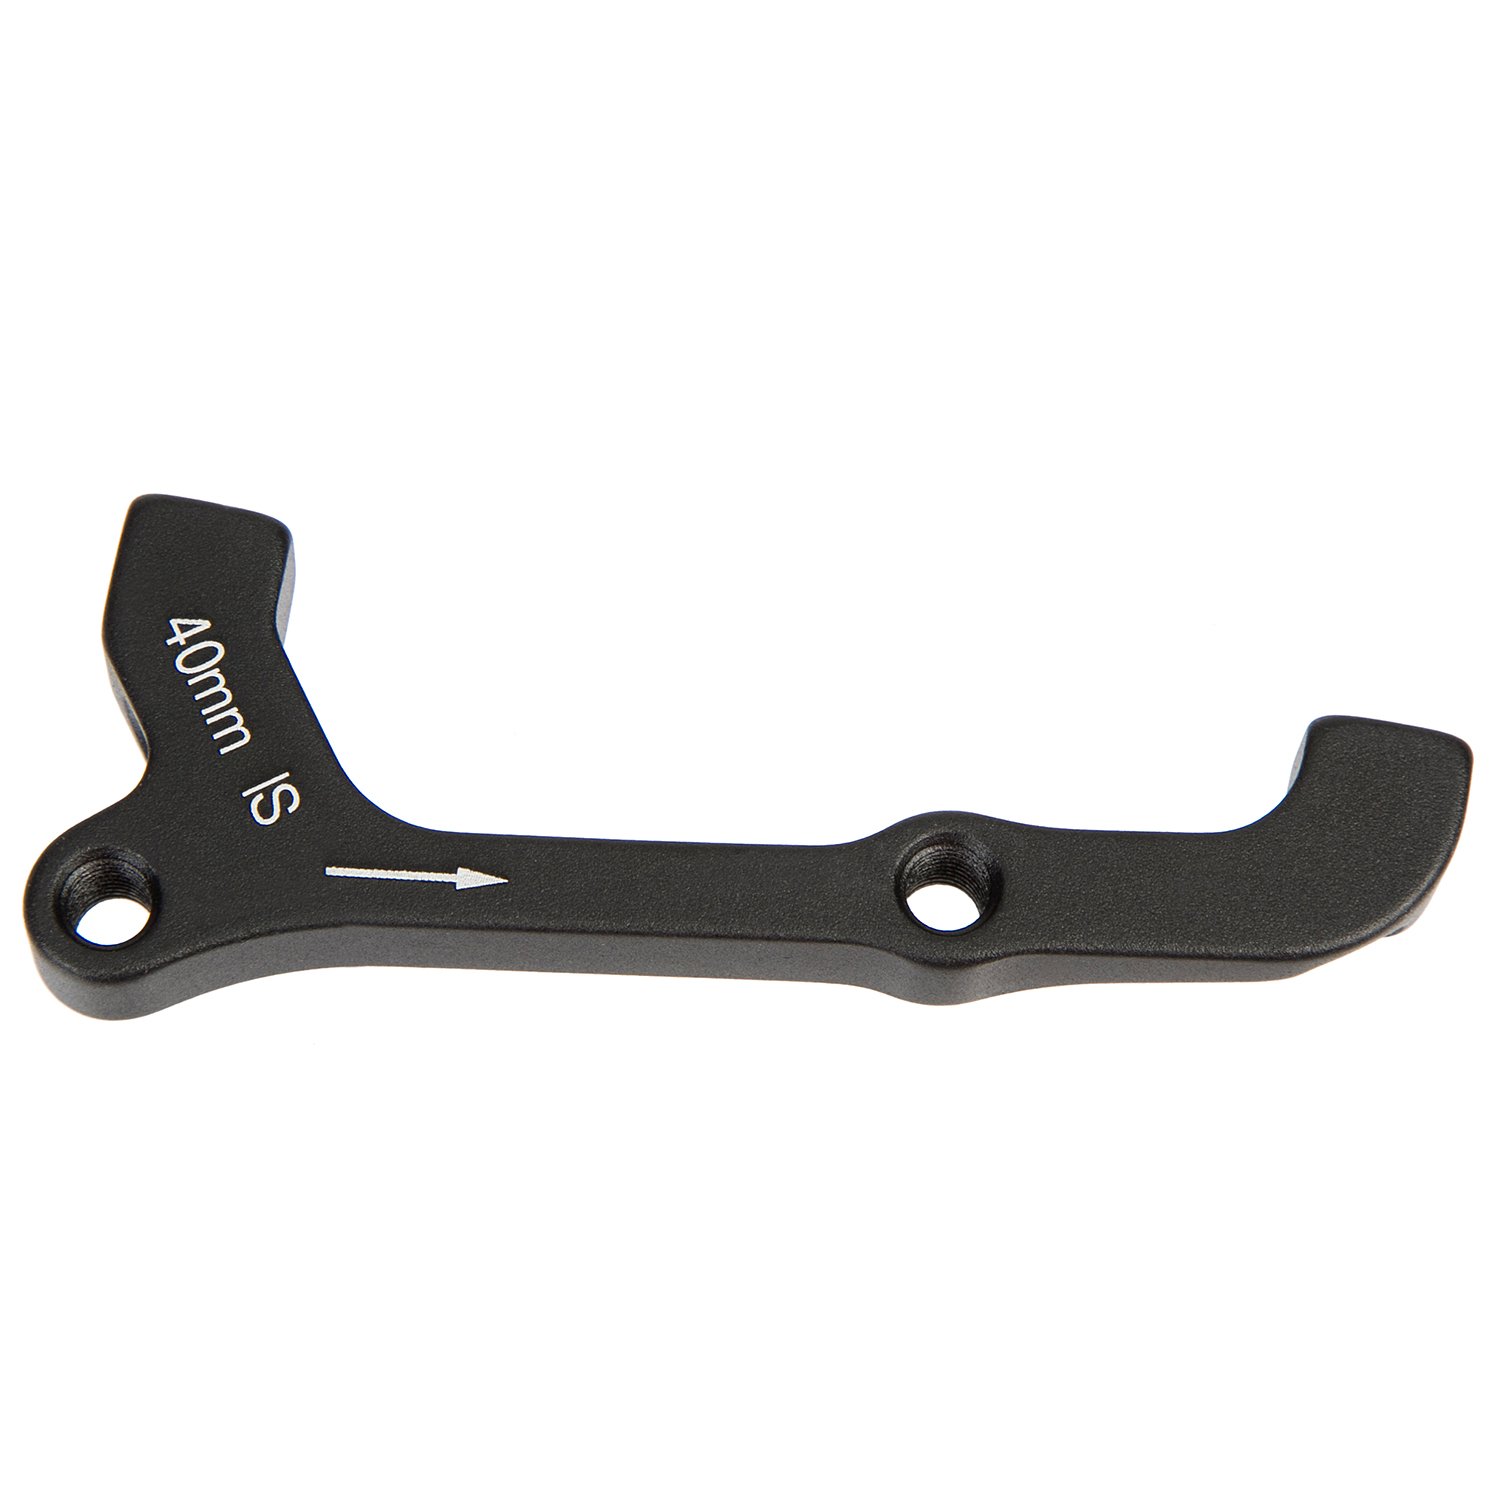 Avid Adapter 40IS Standard Front or rear, PM-brake/IS fork or frame, 200/180 mm